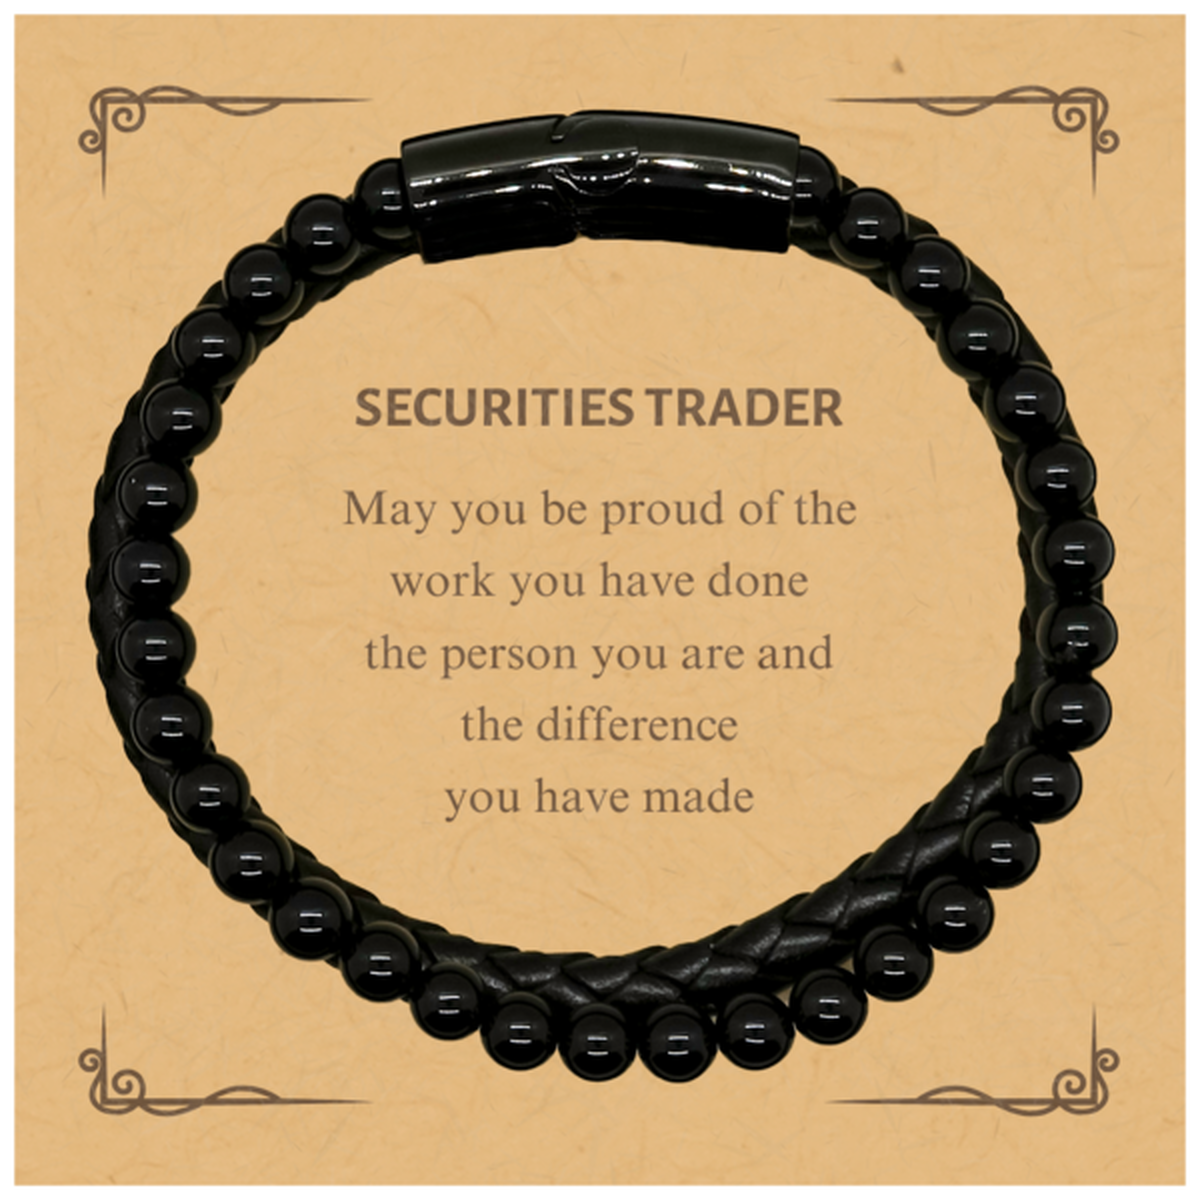 Securities Trader May you be proud of the work you have done, Retirement Securities Trader Stone Leather Bracelets for Colleague Appreciation Gifts Amazing for Securities Trader